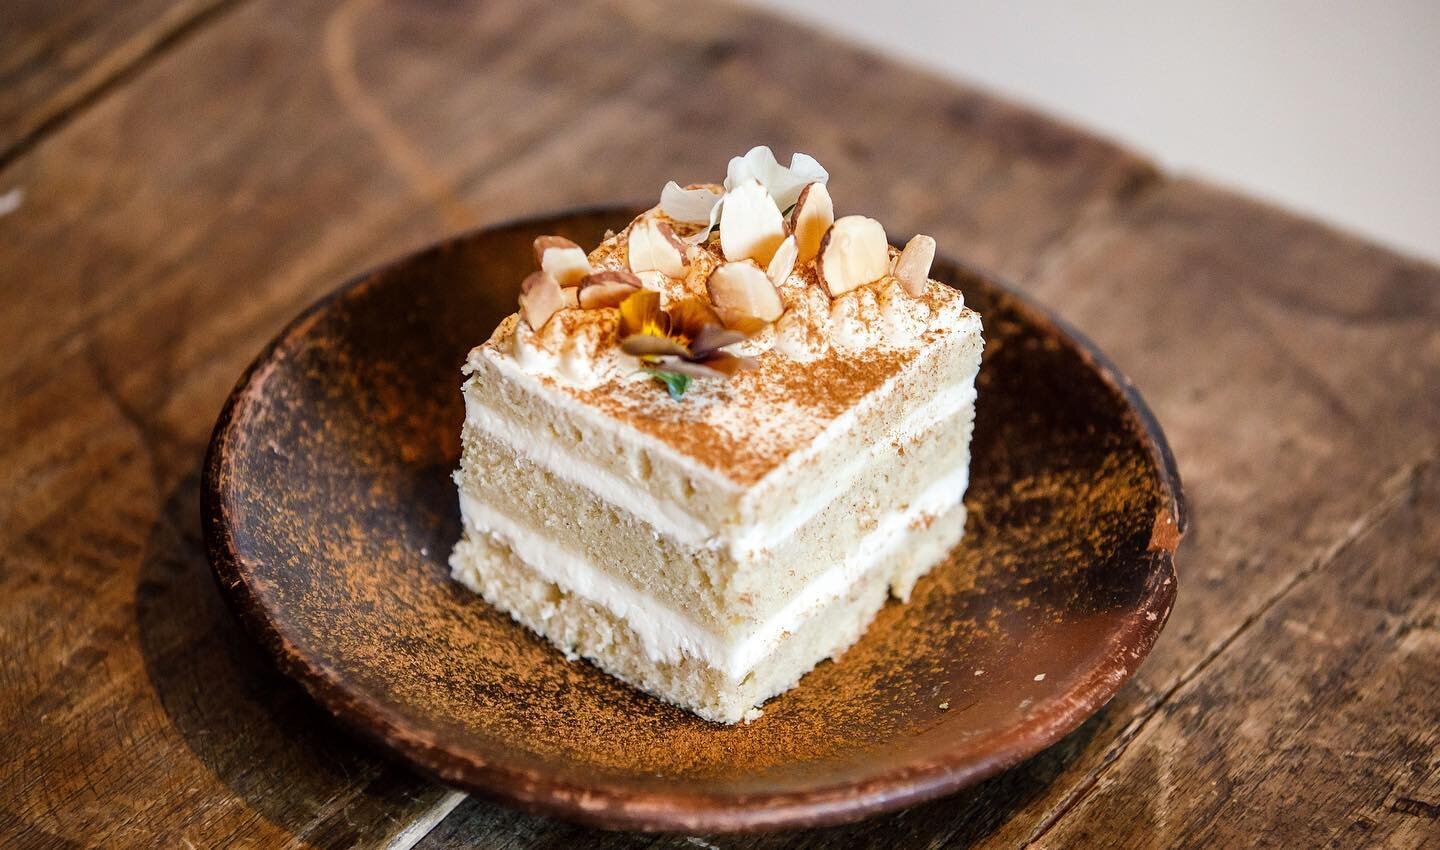 A PIECE OF...

Horchata cake of course! This fluffy little morsel is a delicate combination of soft Vanilla Sponge layered with Queso Blanco, topped with Slivered Almonds and Cinnamon Puffed Rice. 

There's always room for dessert at GITANO, reserve 